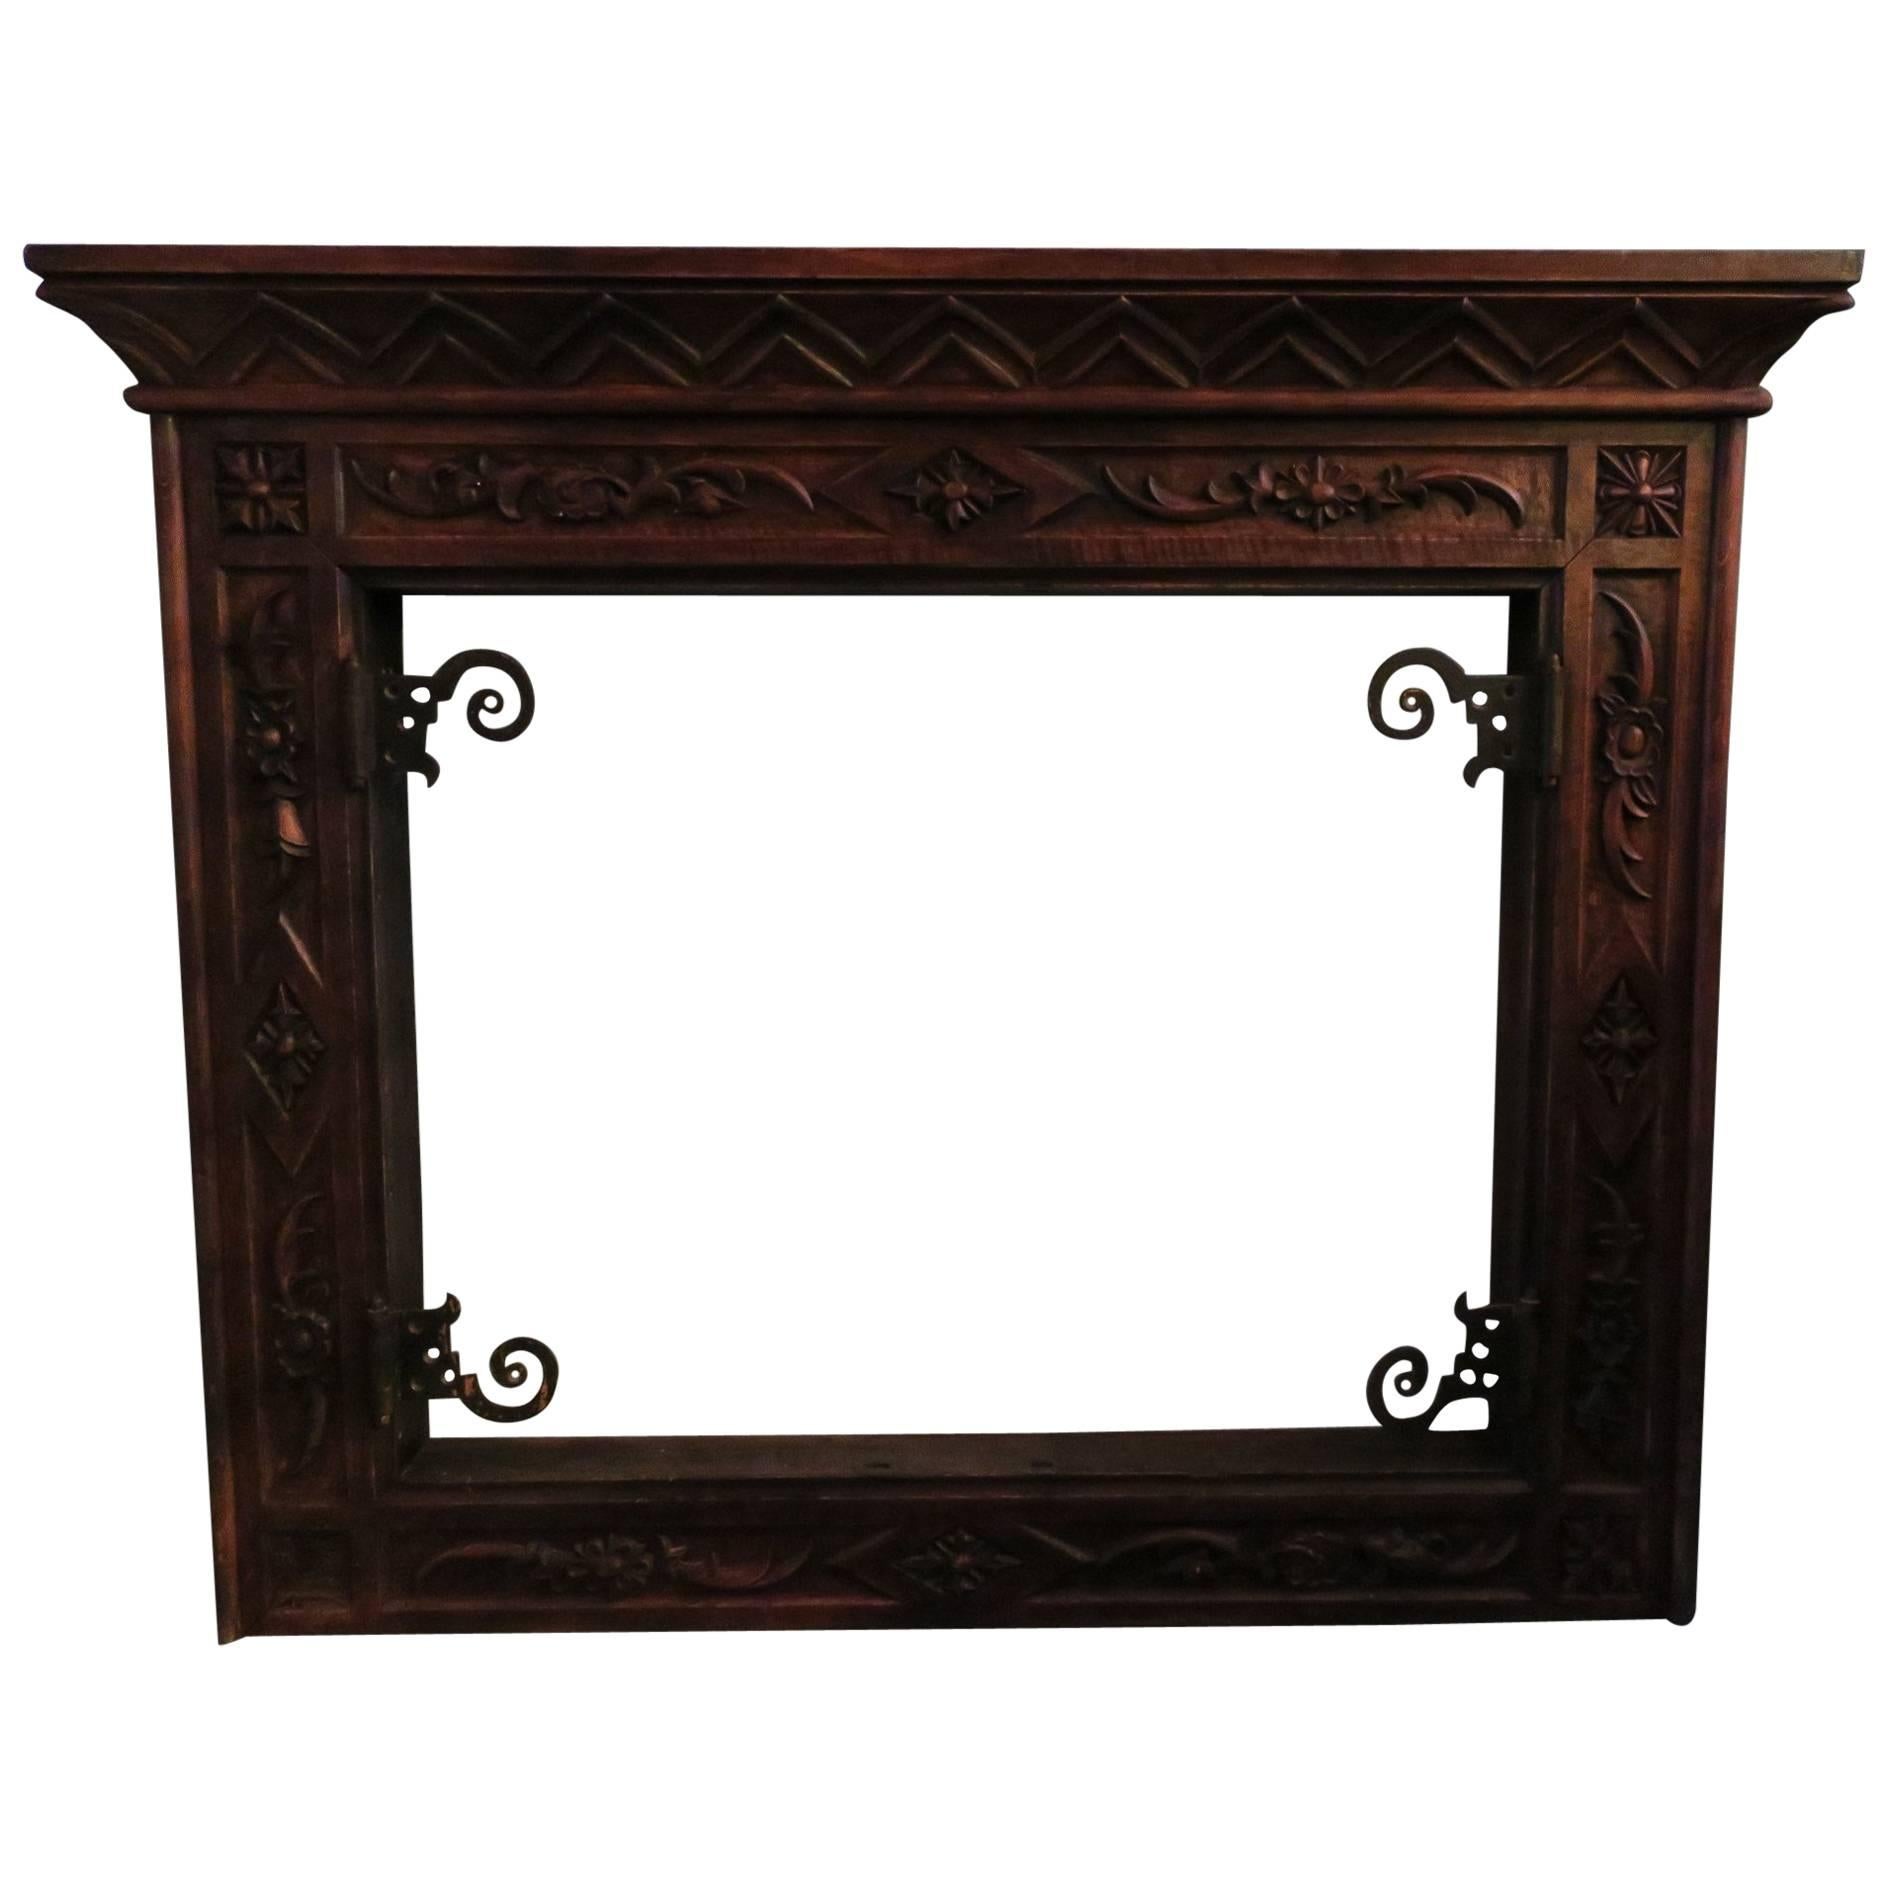 Art Deco Fireplace Carved Wood and Wrought Iron For Sale